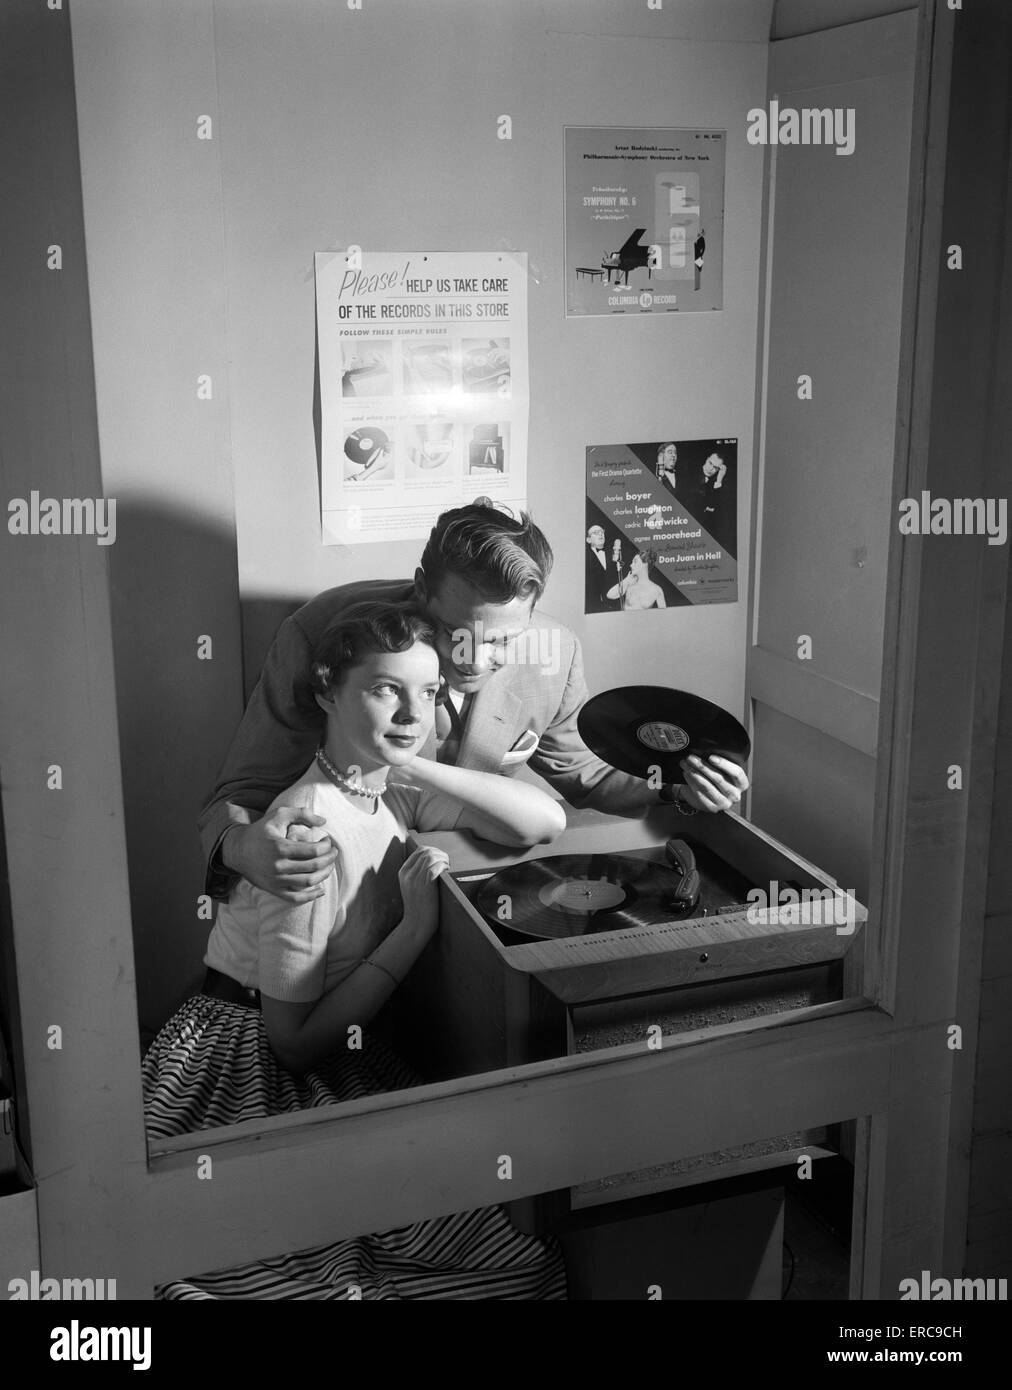 1950s COUPLE SITTING IN STORE RECORD LISTENING BOOTH MAN WITH ARM AROUND WOMAN HOLDING 78 RPM Stock Photo